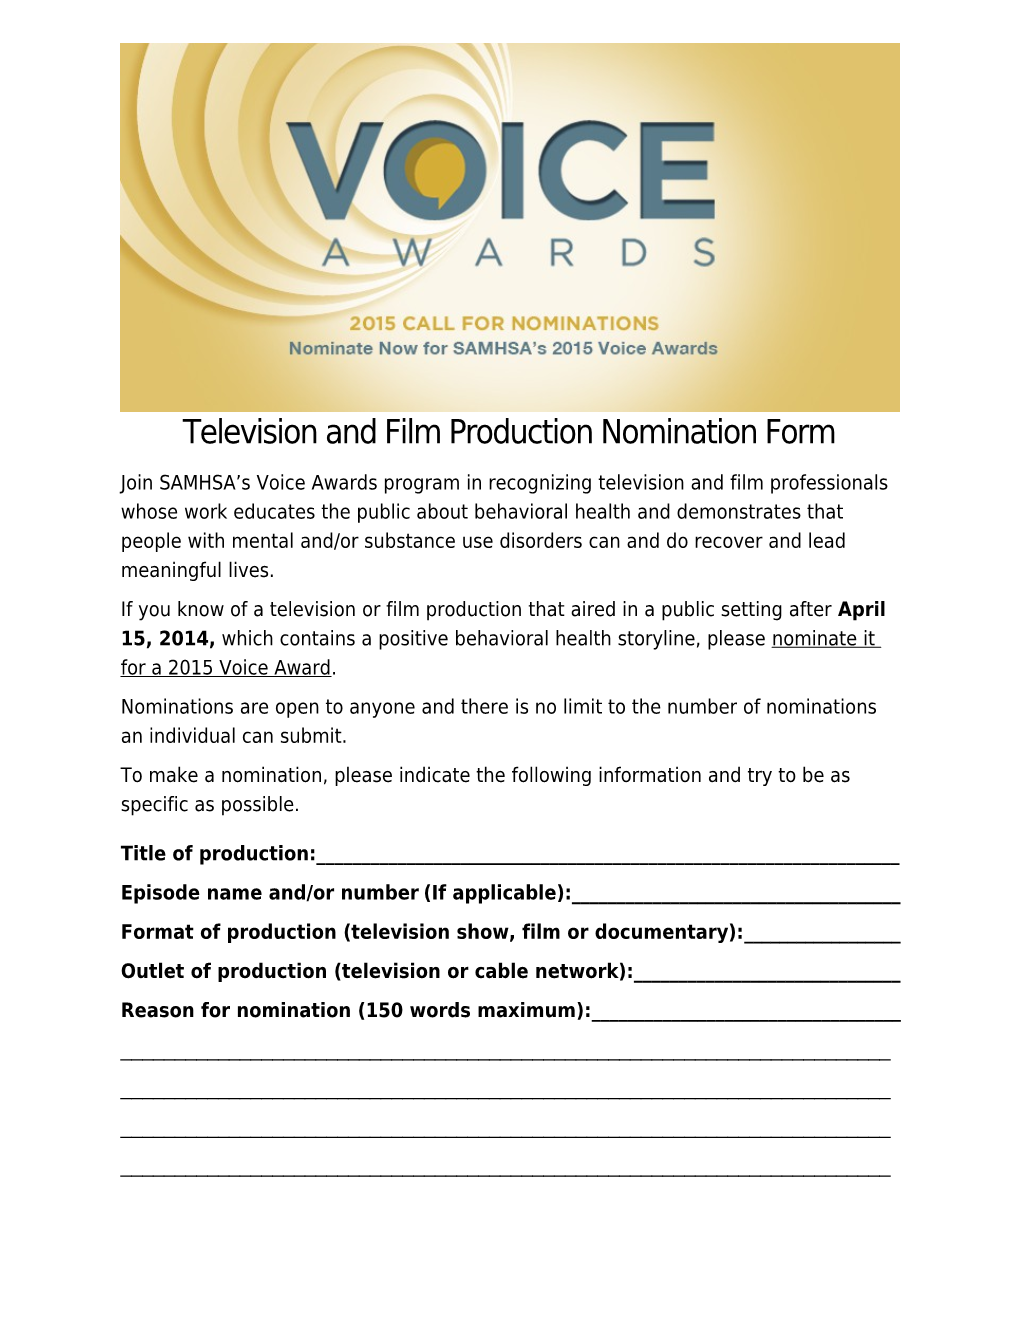 Nominate Productions for SAMHSA's 2012 Voice Awards